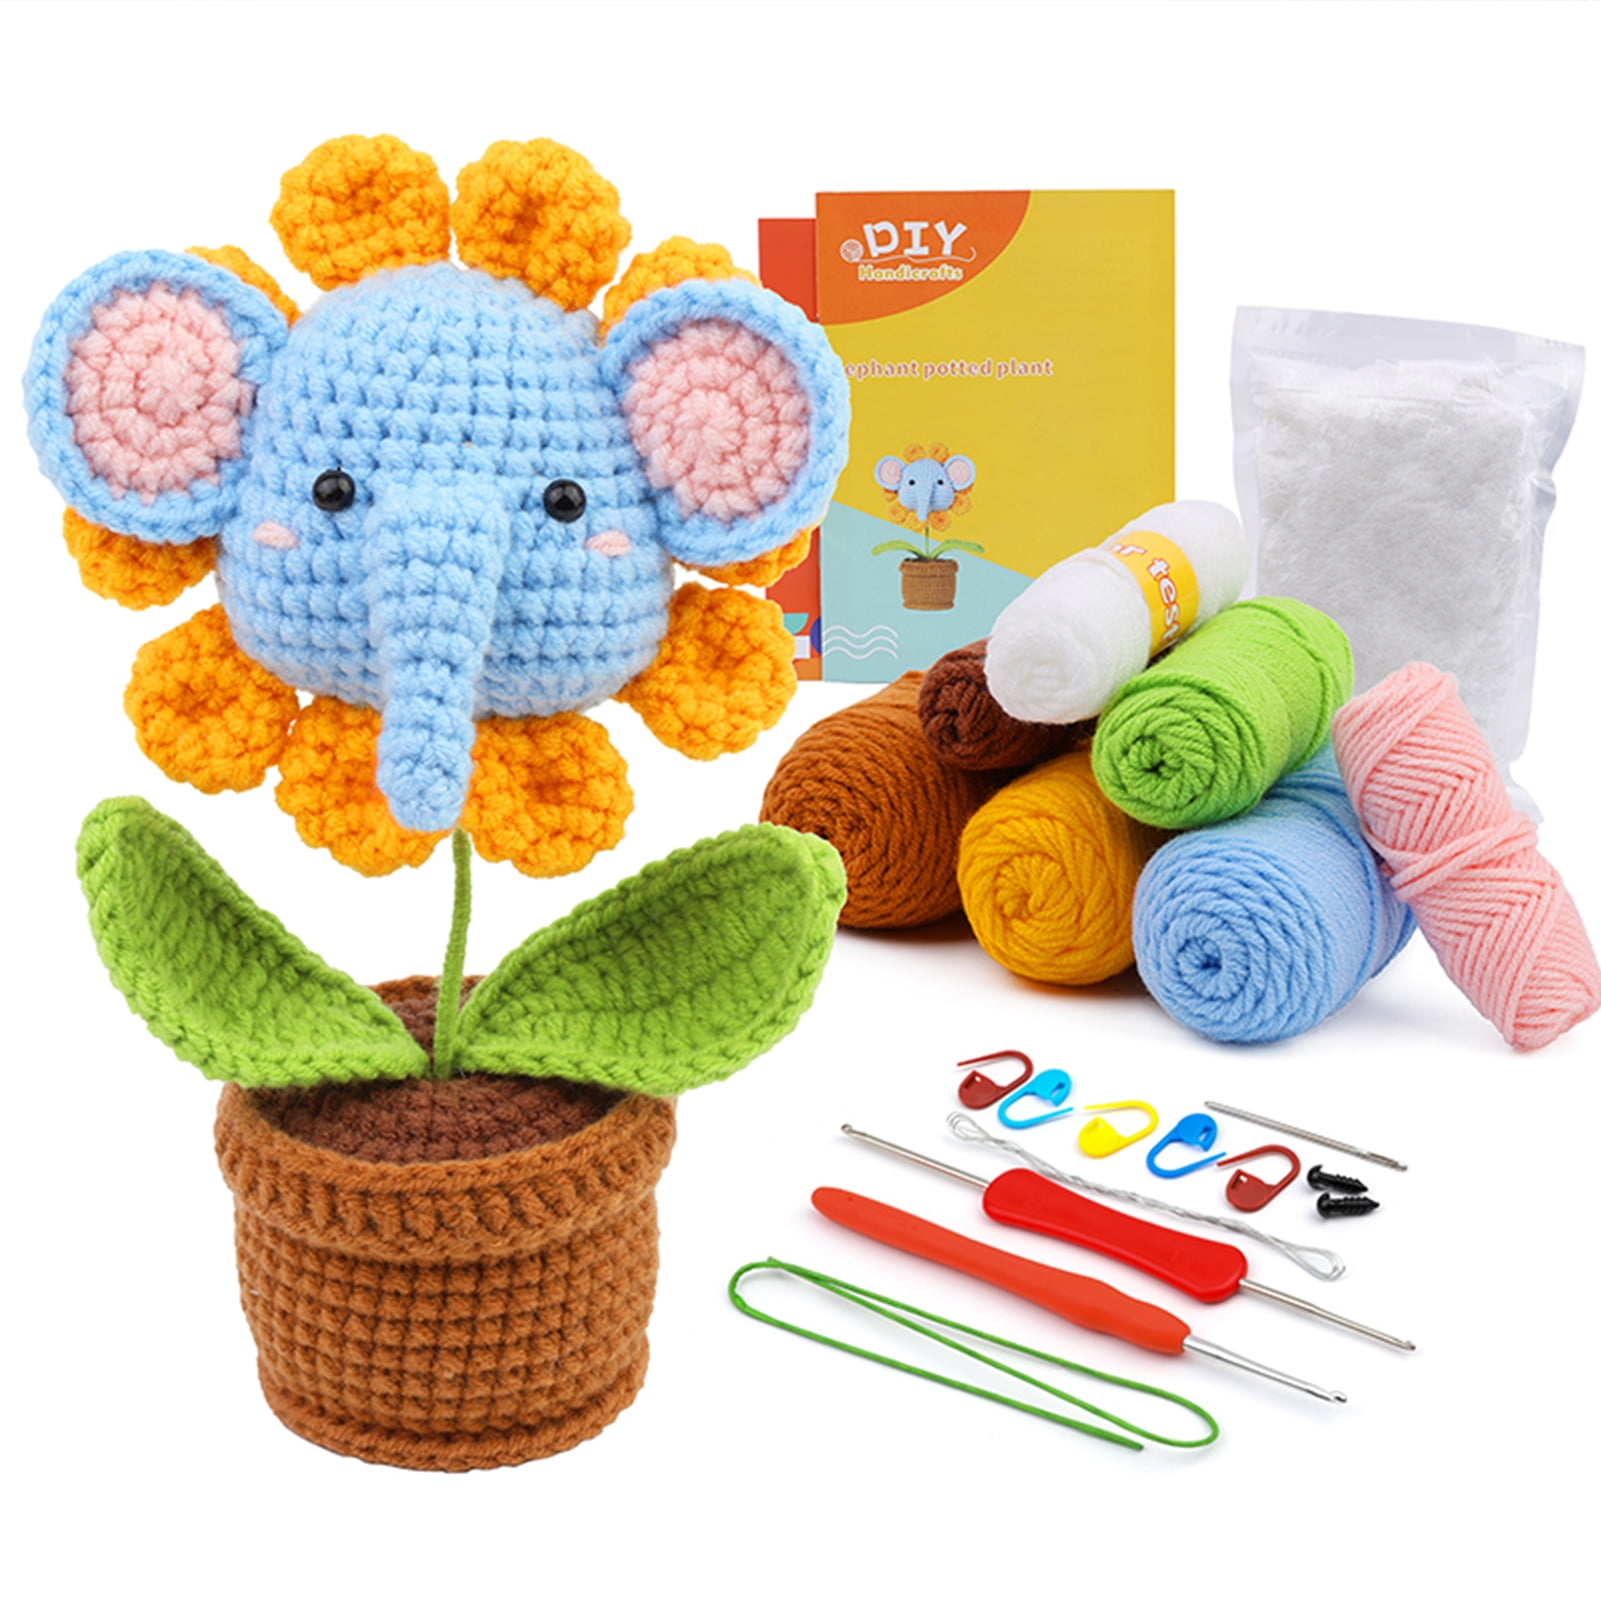 Crocheting Beginners - A AIFAMY Crochet Kit for Beginners Crochet Animals  Kit with Step-by-Step Video Tutorials Learn to Crochet Kits for Adults and  Kids (1P, Koala)  (via )